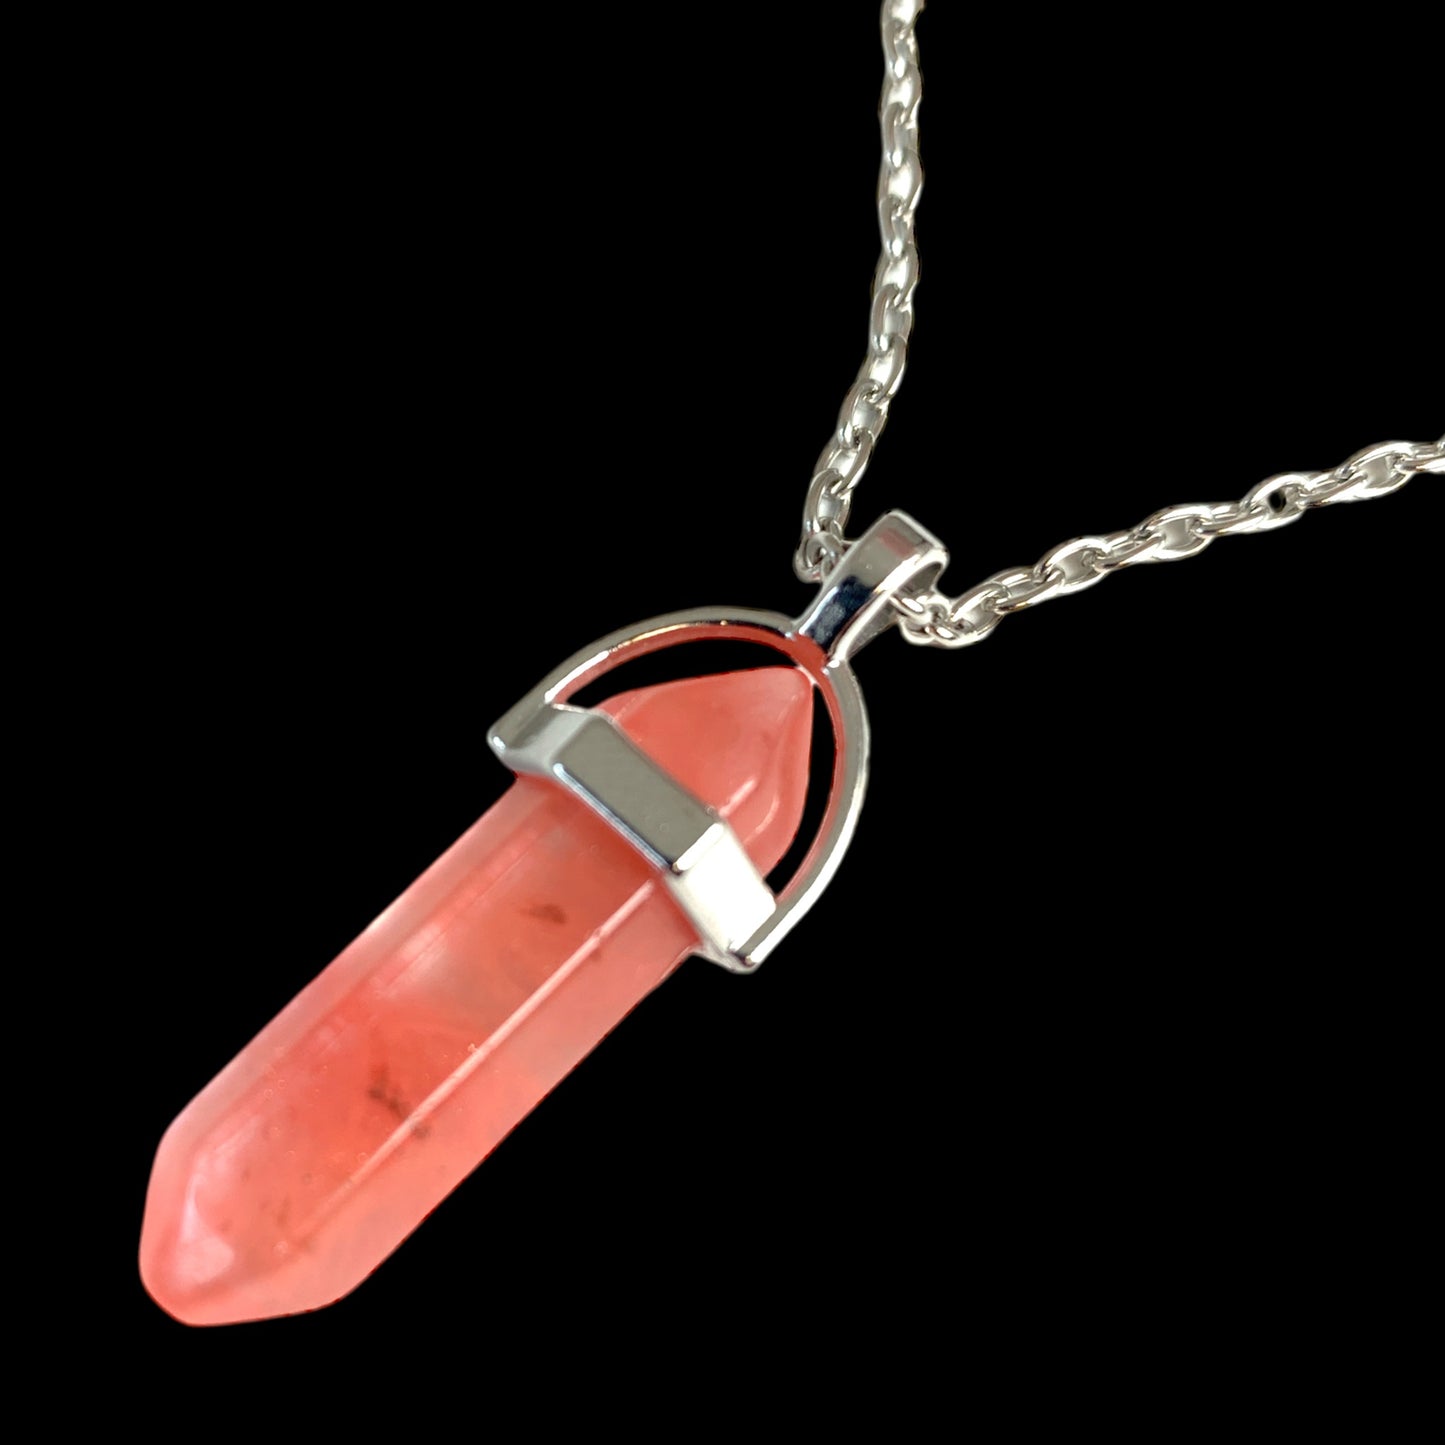 Cherry Quartz Double Terminated Pendulum Stone Pendant 13x35mm with 18 Inch Chain 2 lnch Extender Chain - China - NEW922 - Synthetic